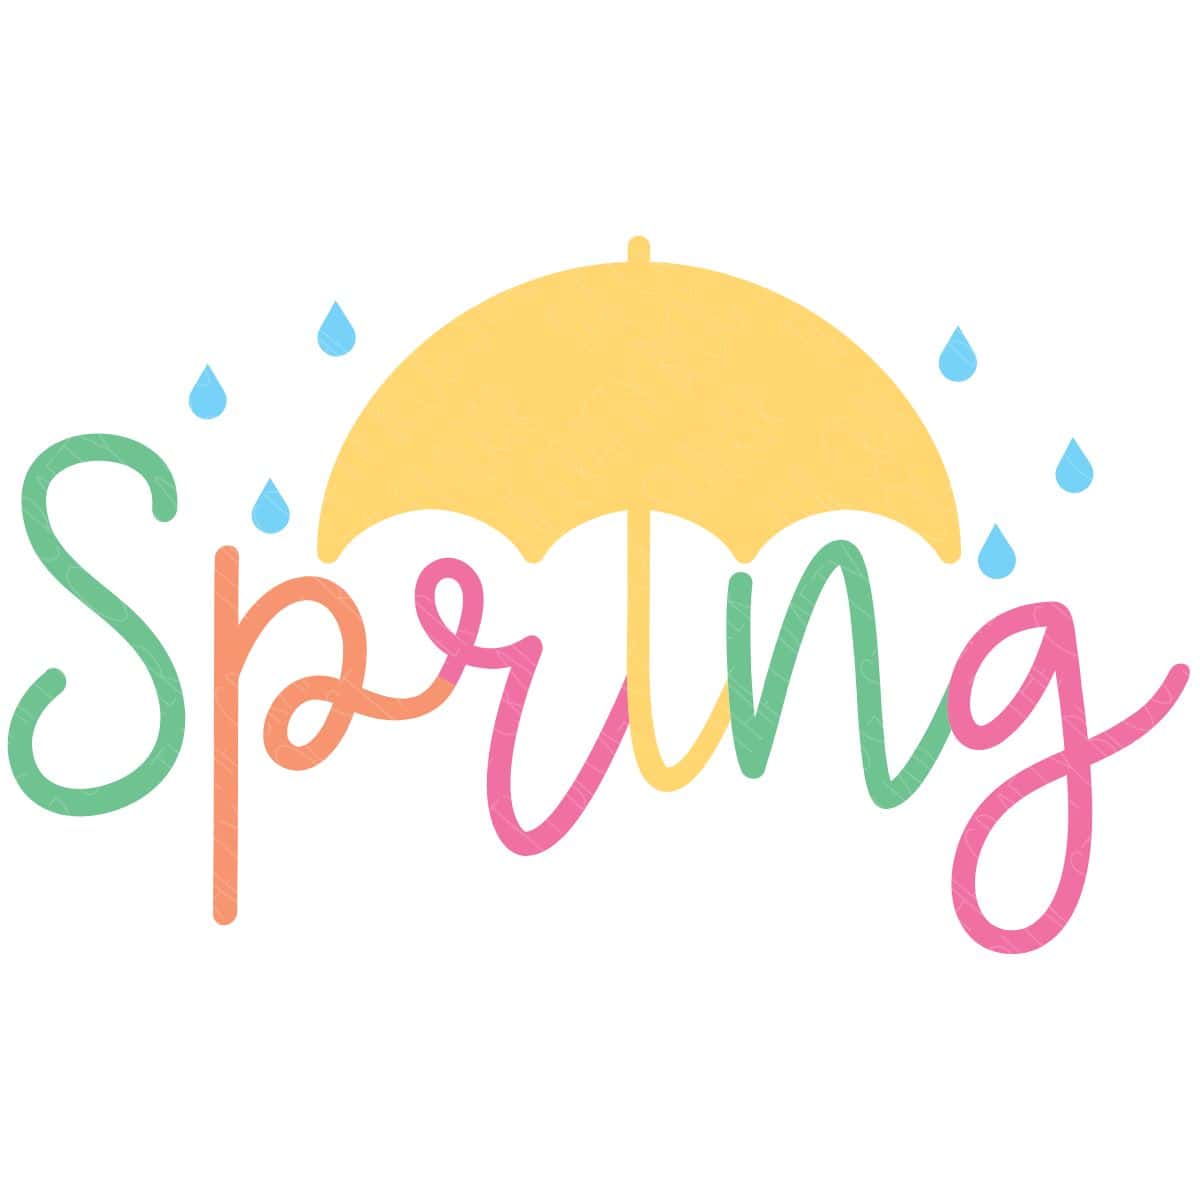 Spring Showers SVG	

			
		
	

		
			Free – Buy Now Checkout
							
					
						
							
						
						Added to cart